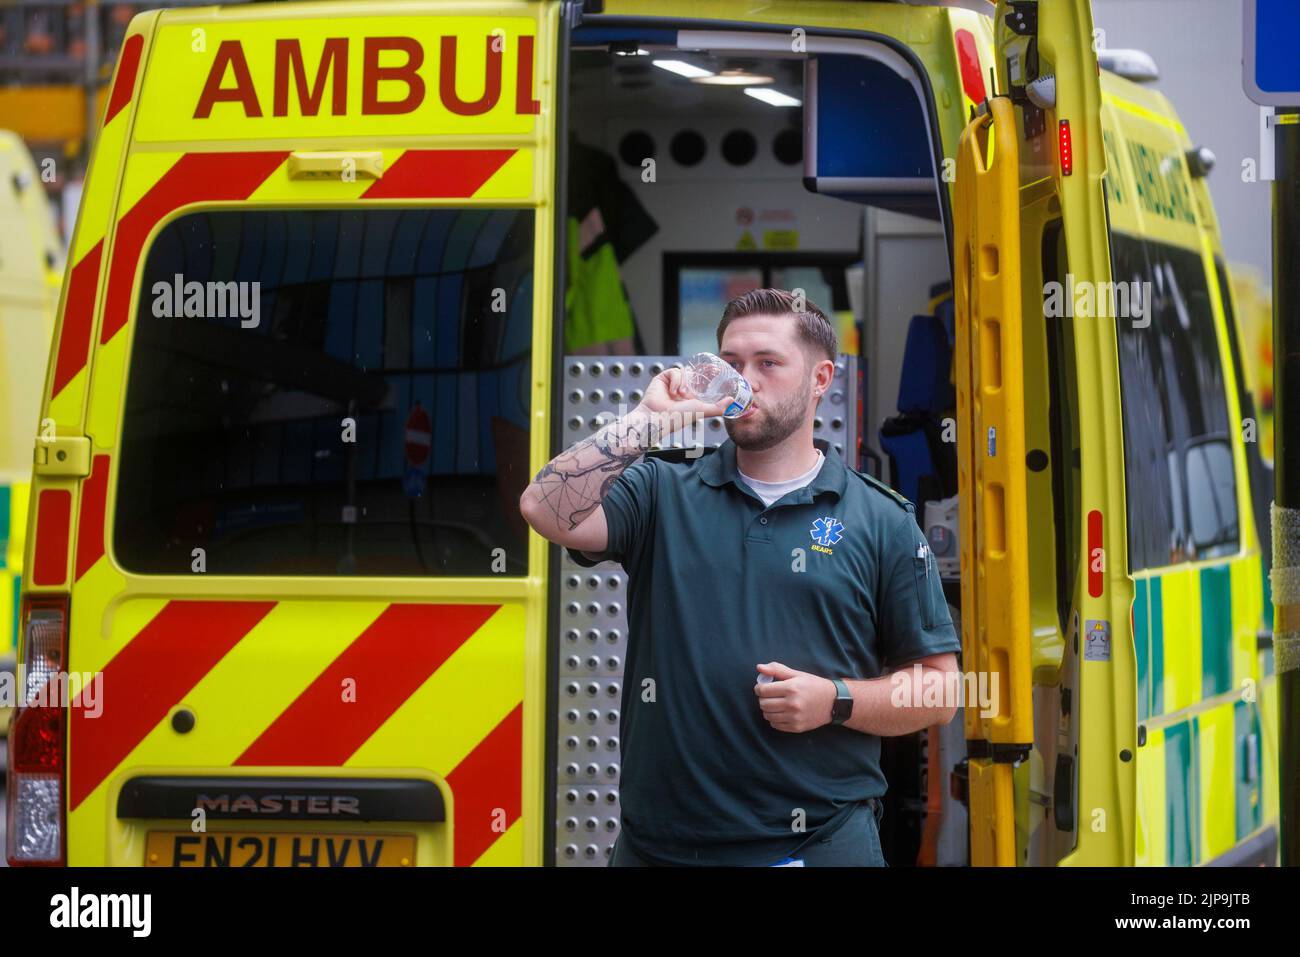 An ambulance worker takes a break during a shift during the hot summer weather. The ambulance service is under pressure with increased workload. Stock Photo